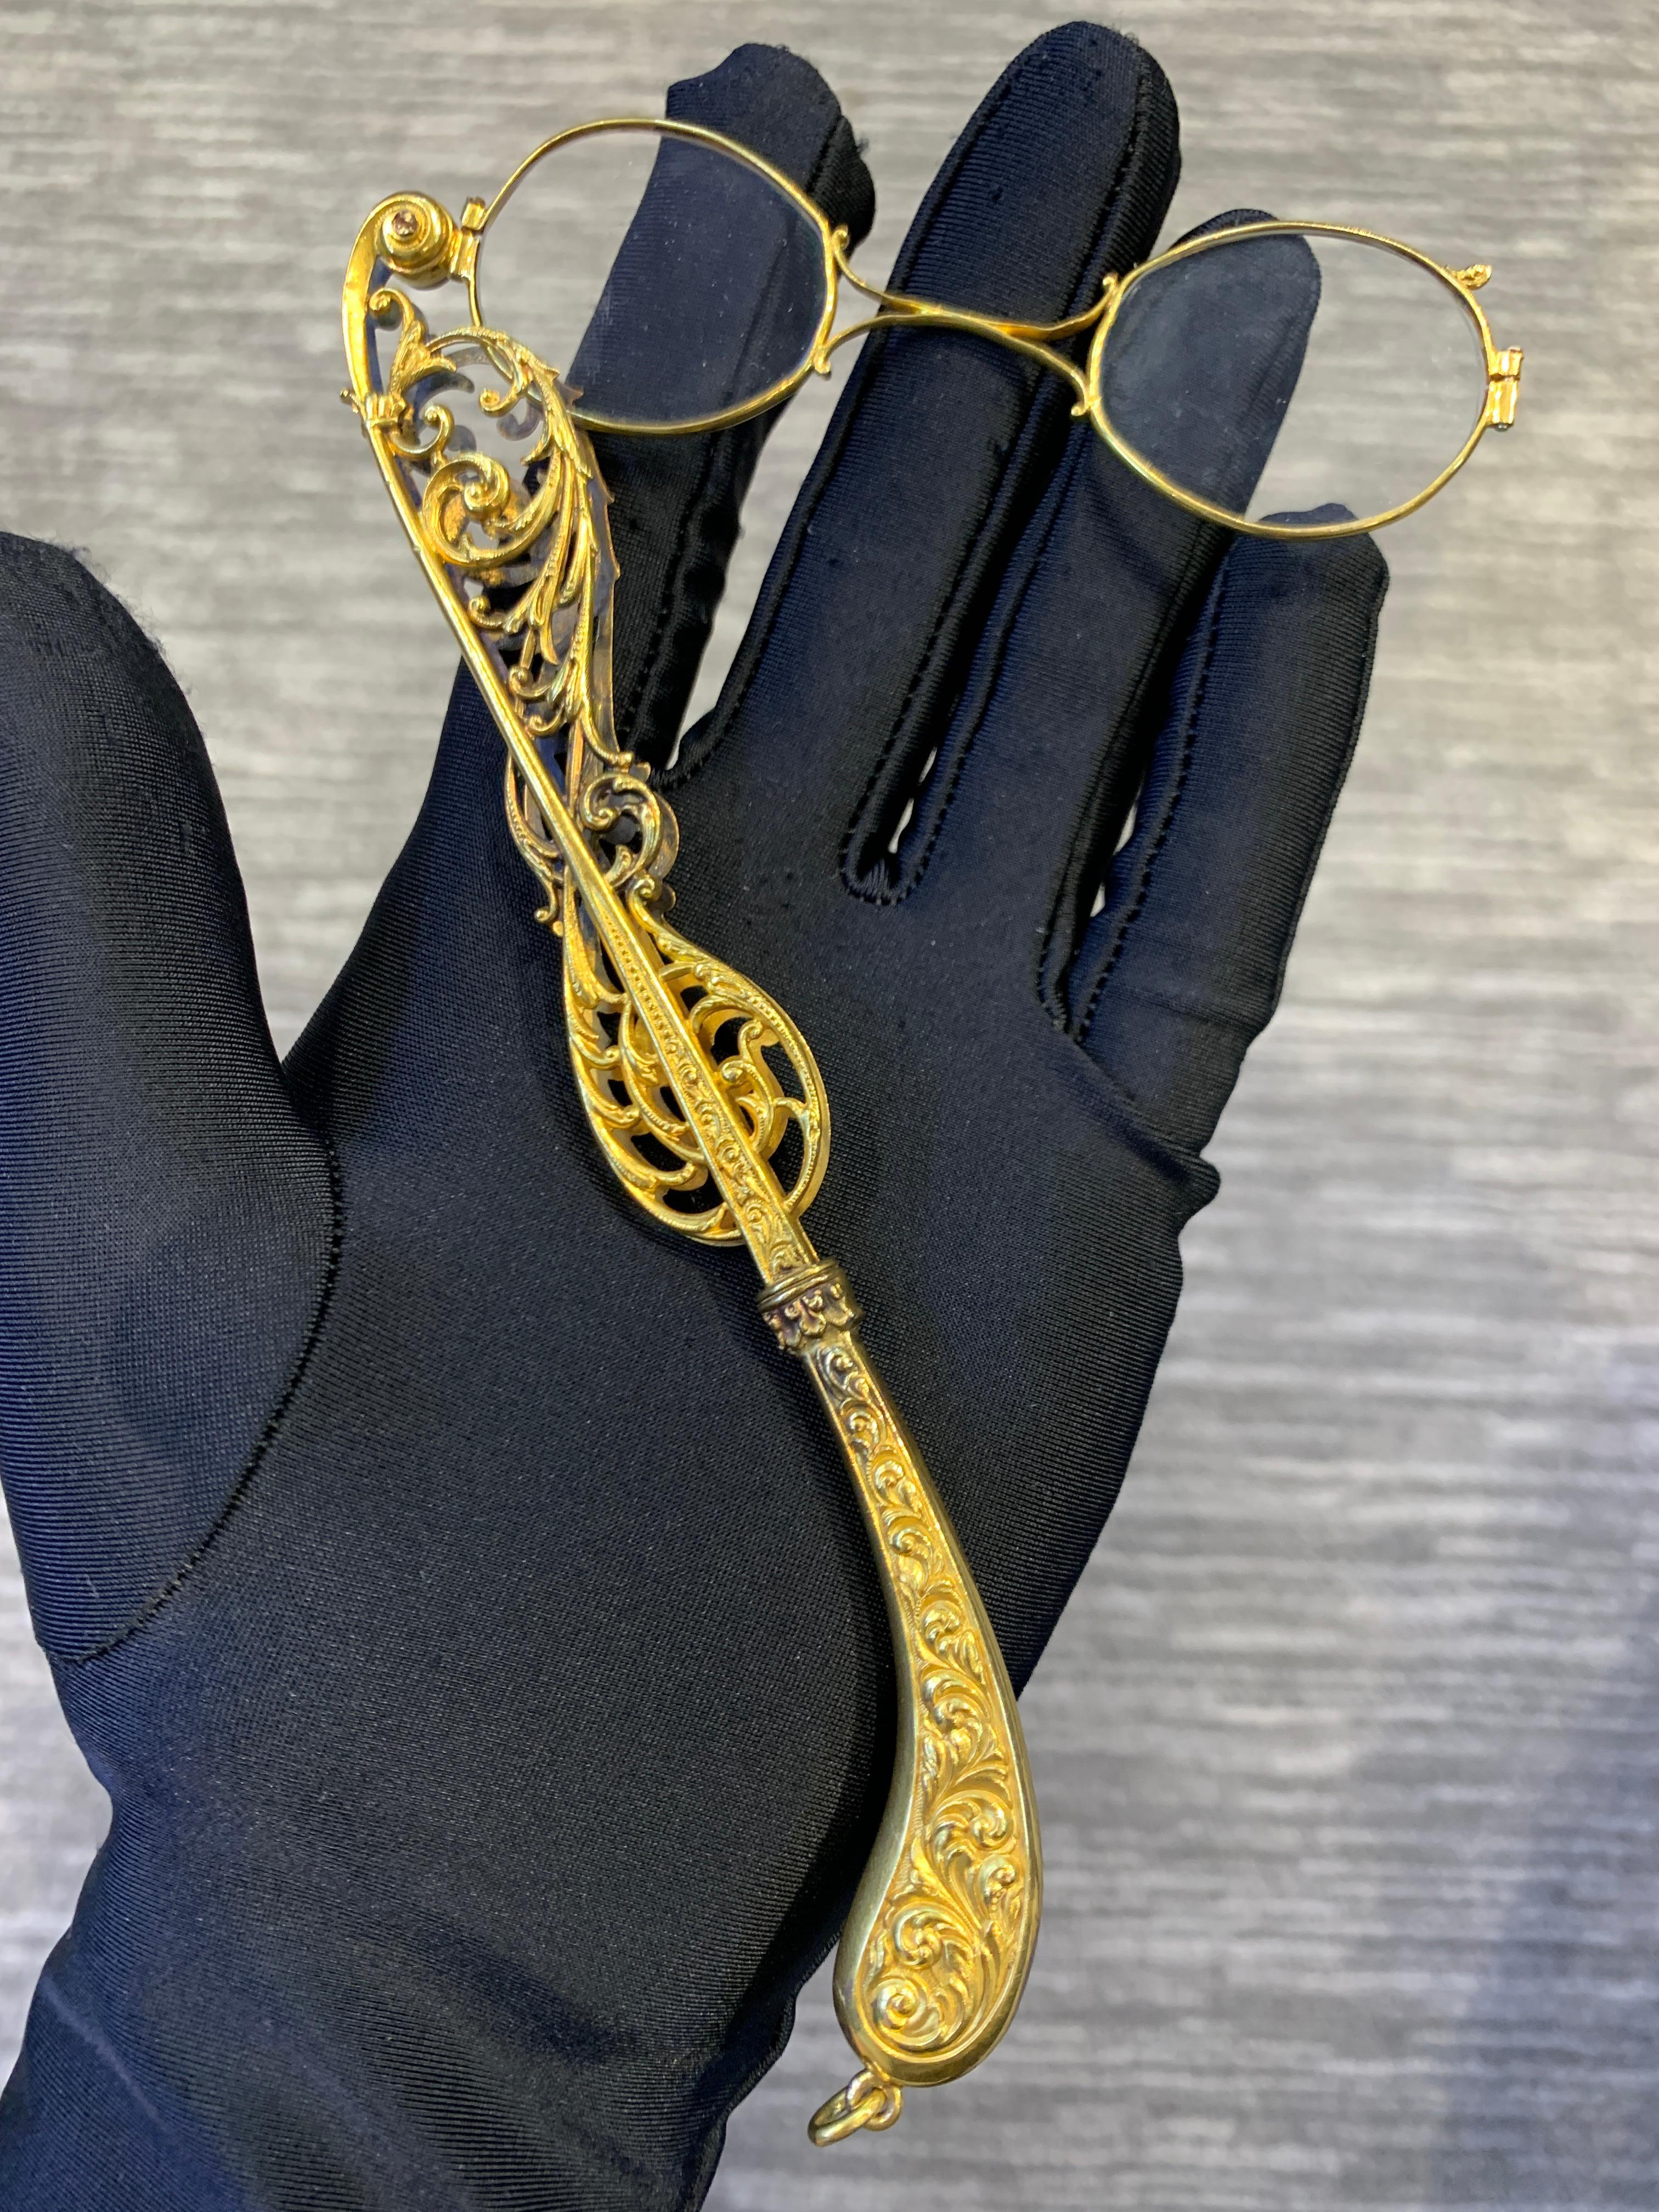 Antique Gold Lorgnette

An intricately designed yellow gold lorgnette with folding opera glasses.

Handle Length: 6.75